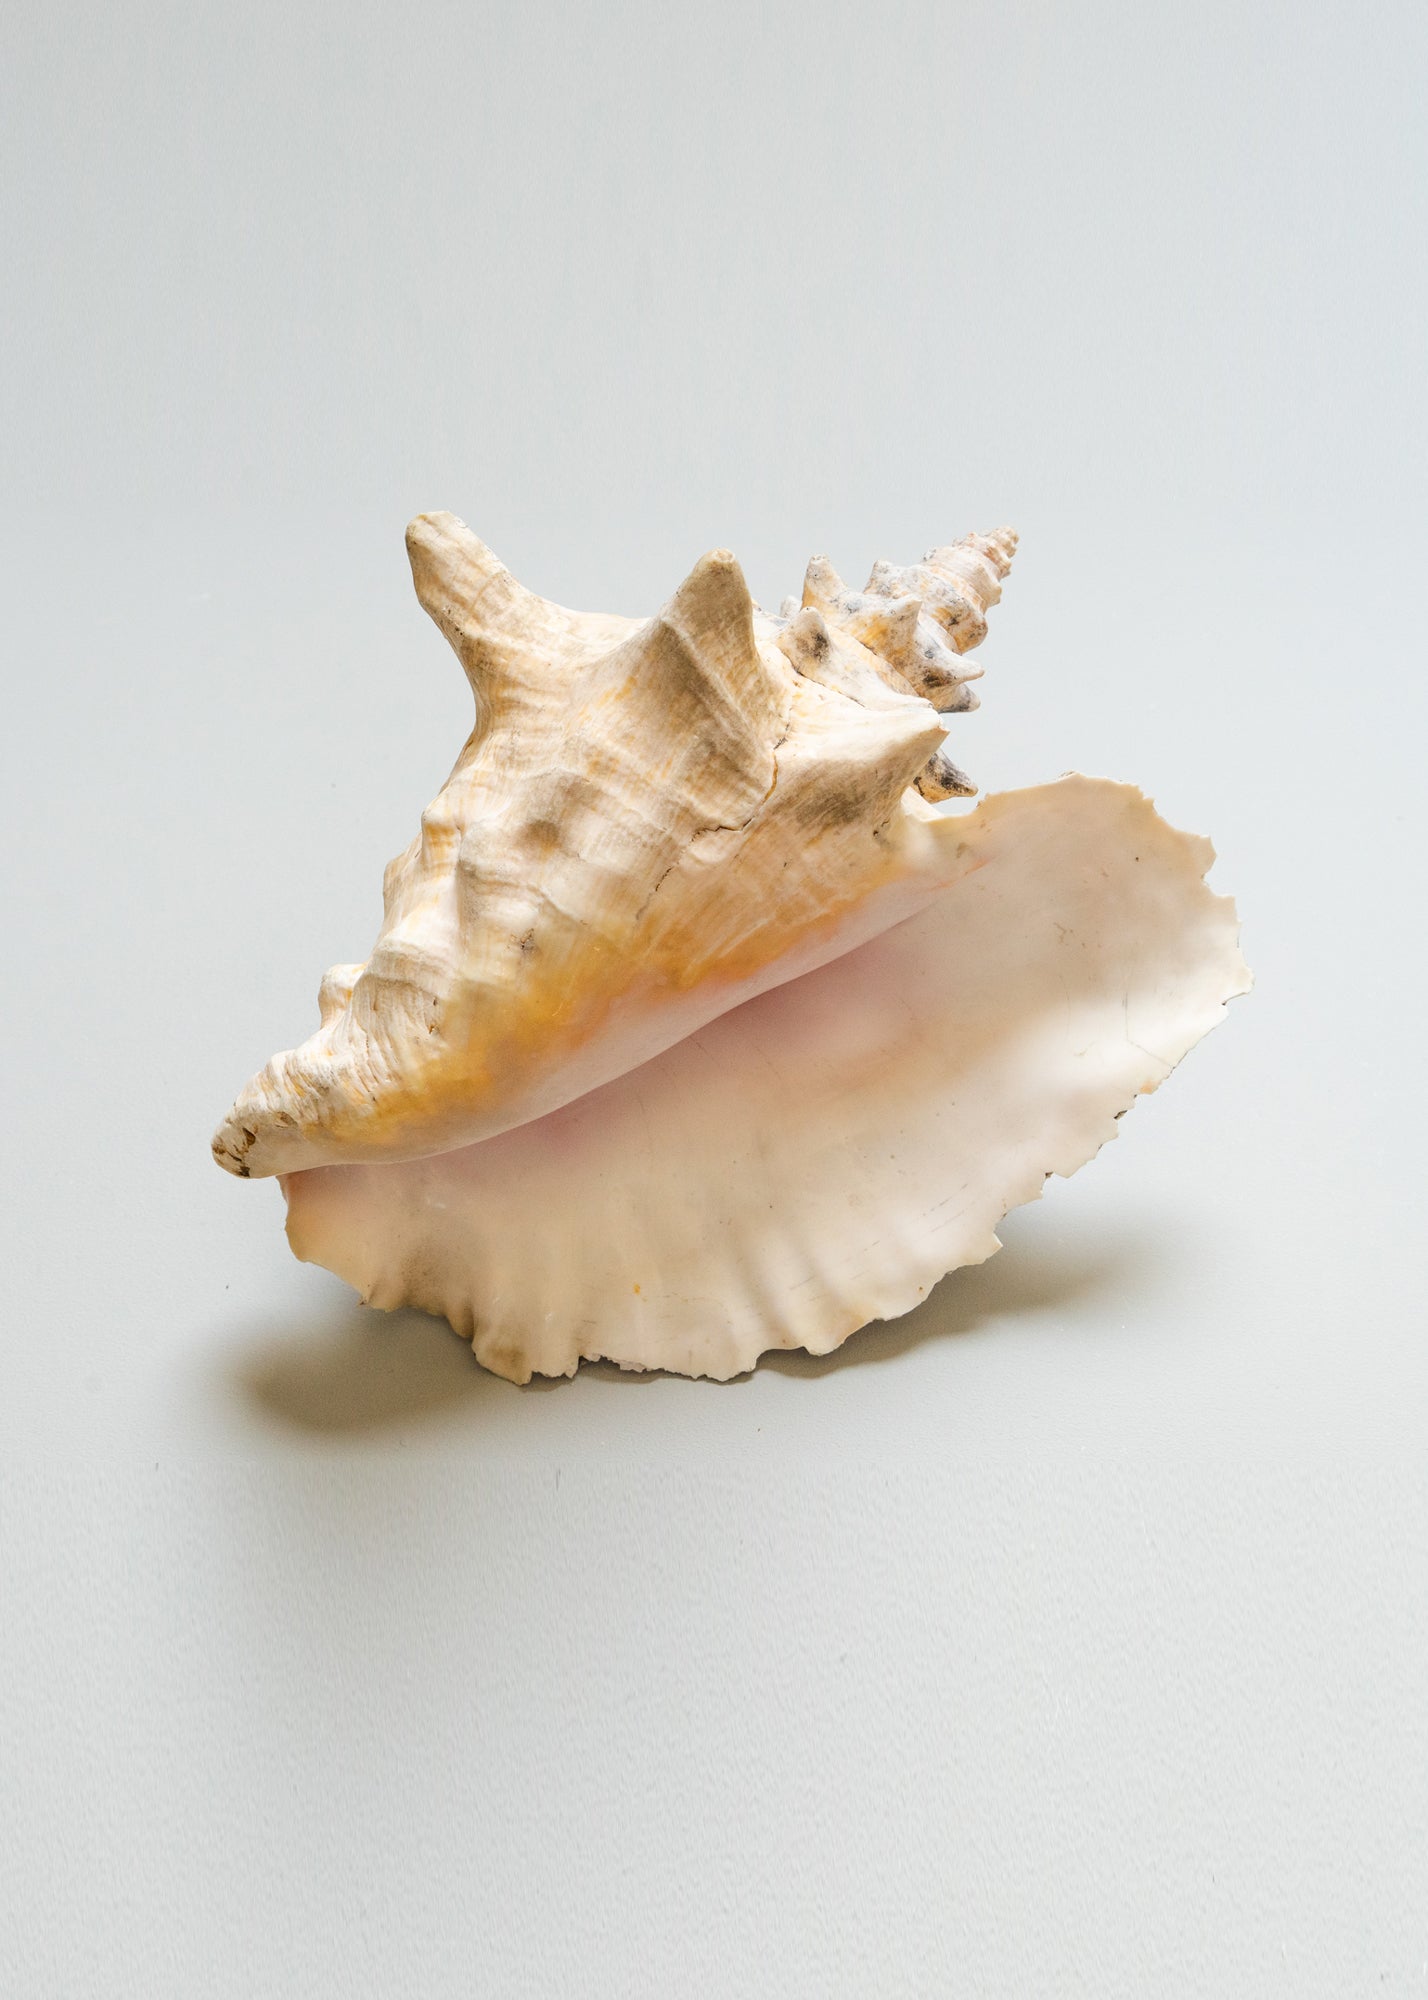 Giant Antique Conch Shell